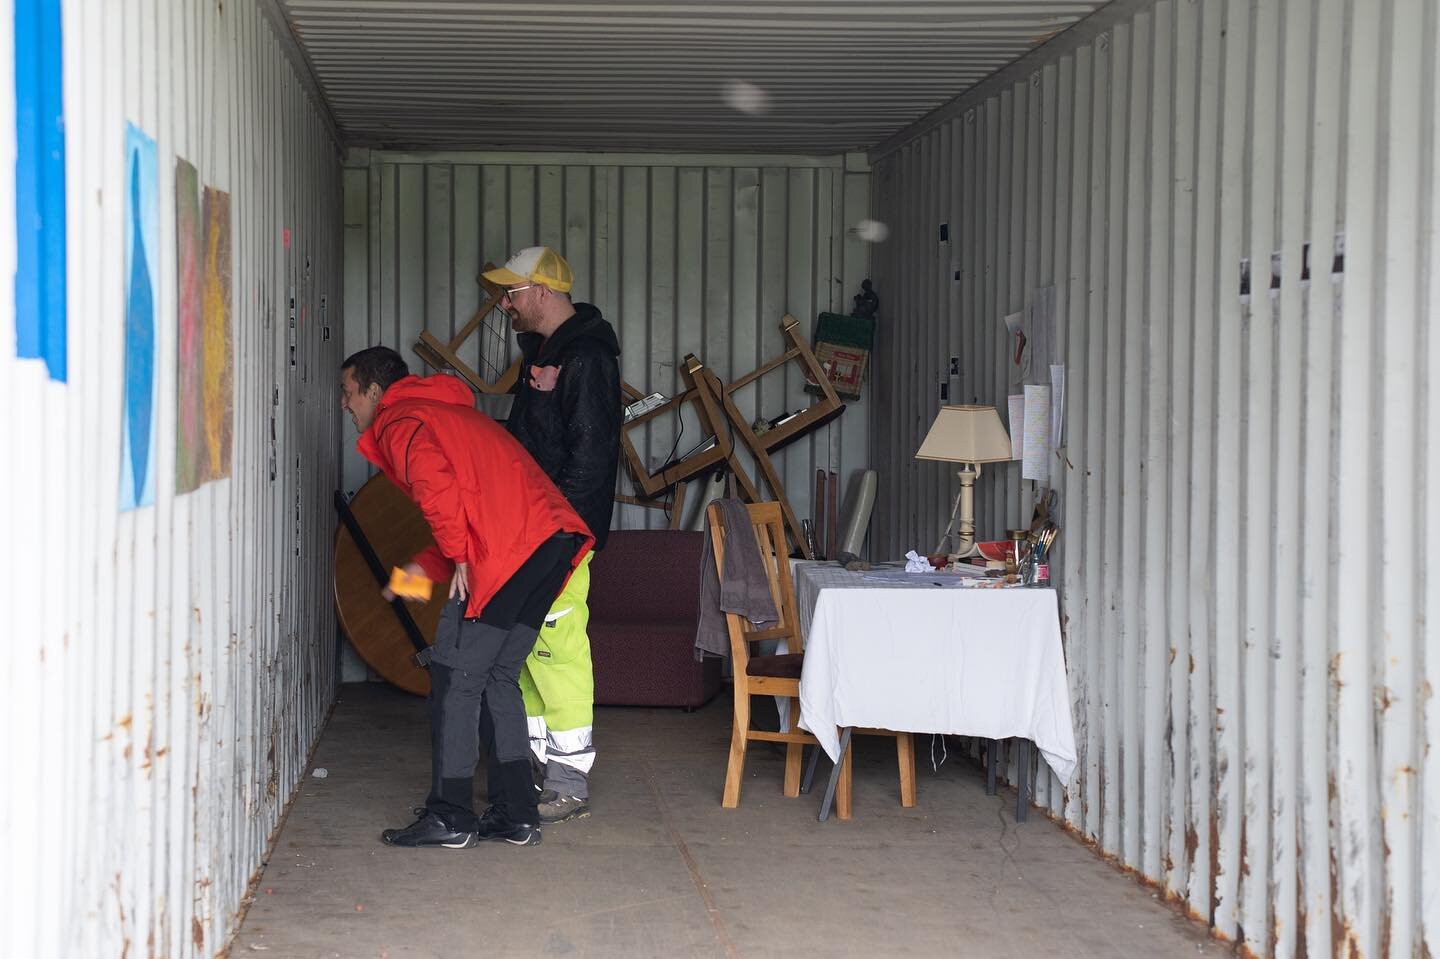 Finally sharing photos from the lovely ✨NYTJAG&Aacute;MURINN✨ an exhibition in the &ldquo;thrift container&rdquo; at the Laugarvatn dump, featuring the June 2022 @gullkistan.is resident artists: @verenaromanens @eefypmaa @karusalli @tiffanyjoy1955 @m